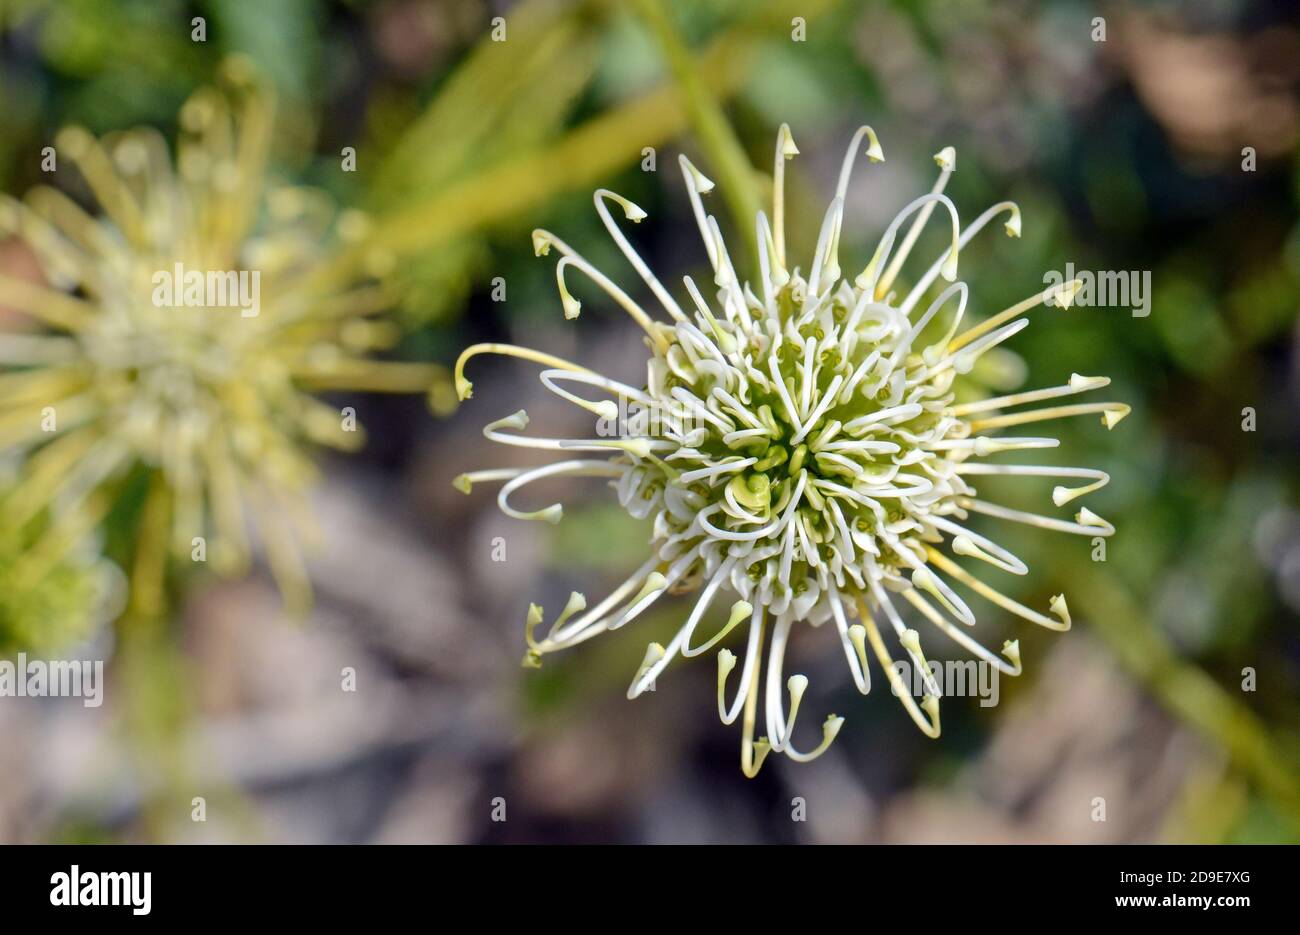 Overhead view of an Australian native Grevillea scapigera flower, family Proteaceae. Common name is the Corrigin Grevillea. Listed as endangered. Ende Stock Photo